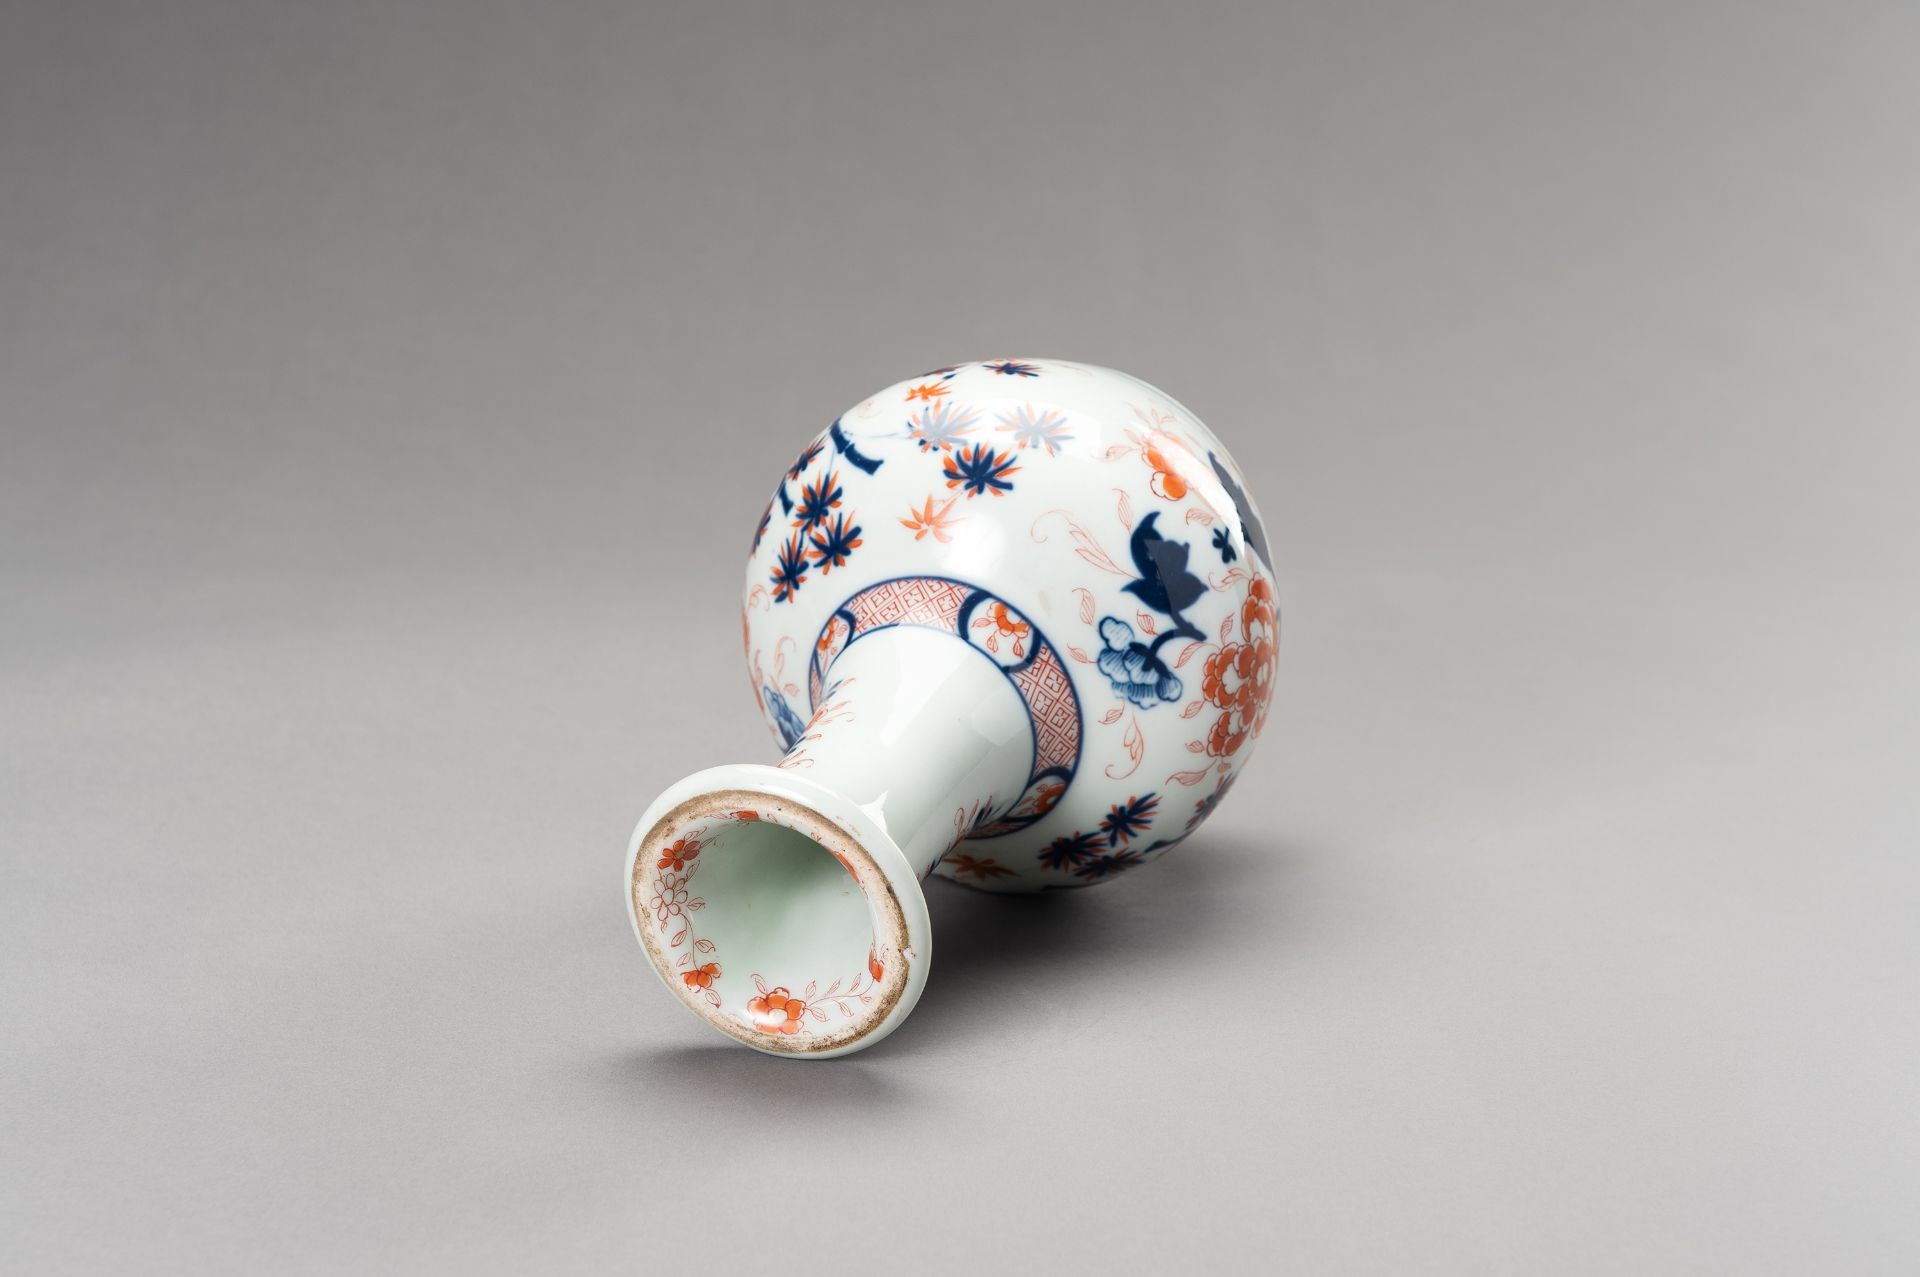 AN IMARI 'FLOWERS AND BAMBOO' PORCELAIN VASE, QING DYNASTY - Image 9 of 11